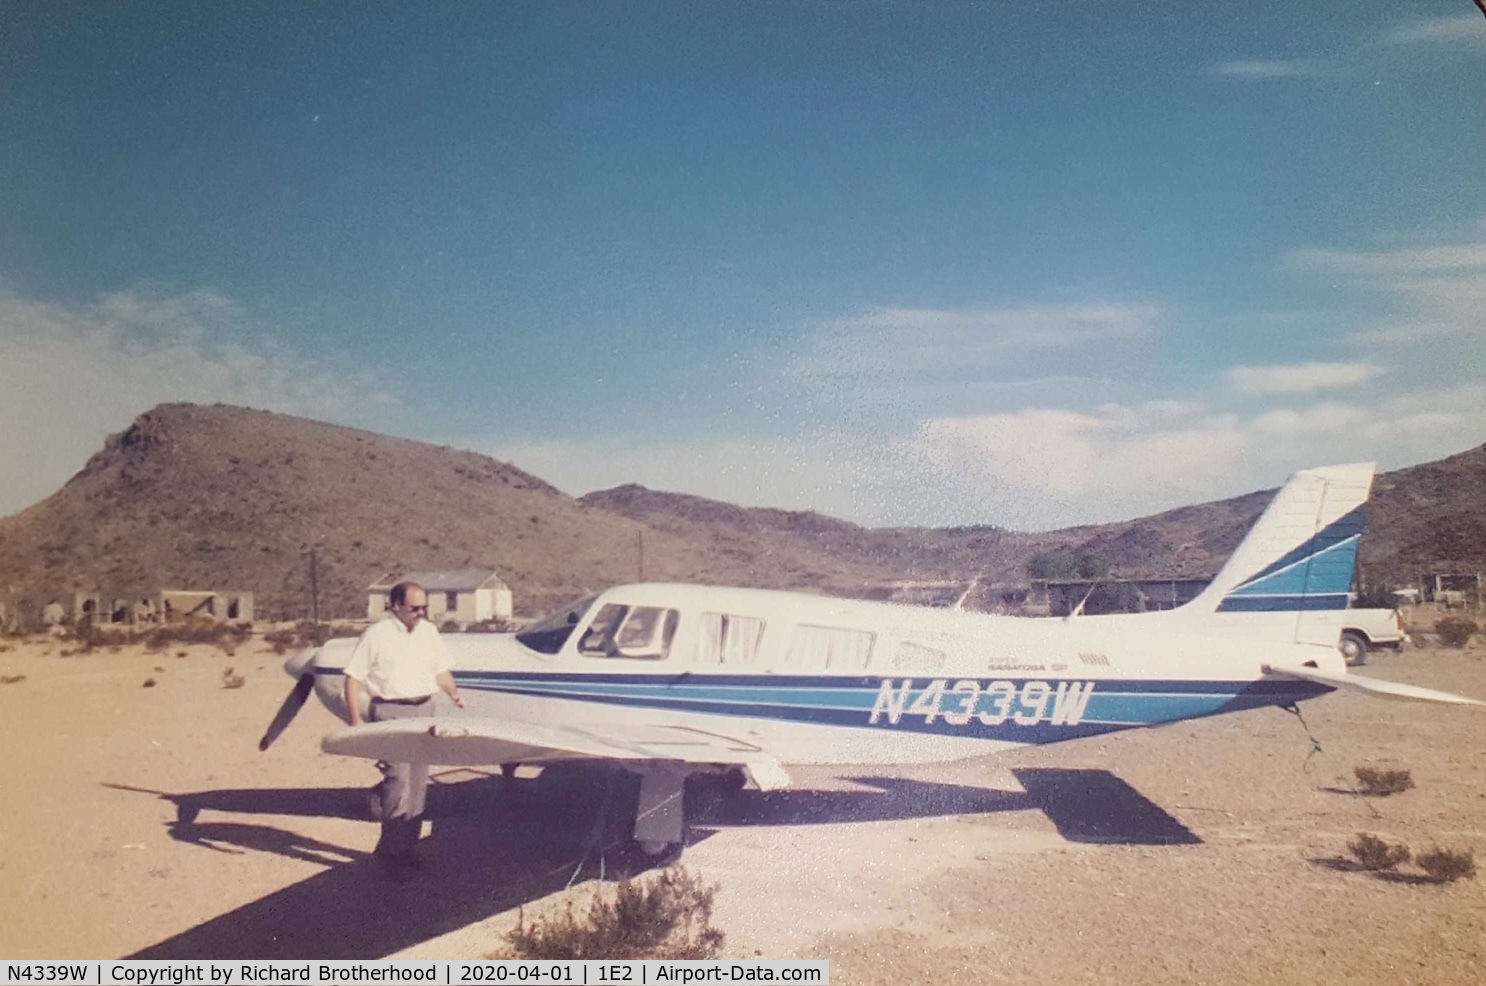 N4339W, 1983 Piper PA-32R-301 Saratoga C/N 32R-8413008, I flew this Saratoga from THV (Thomasville, PA) to 1E2 (Terlingua, TX) and back in 1986. Great airplane.